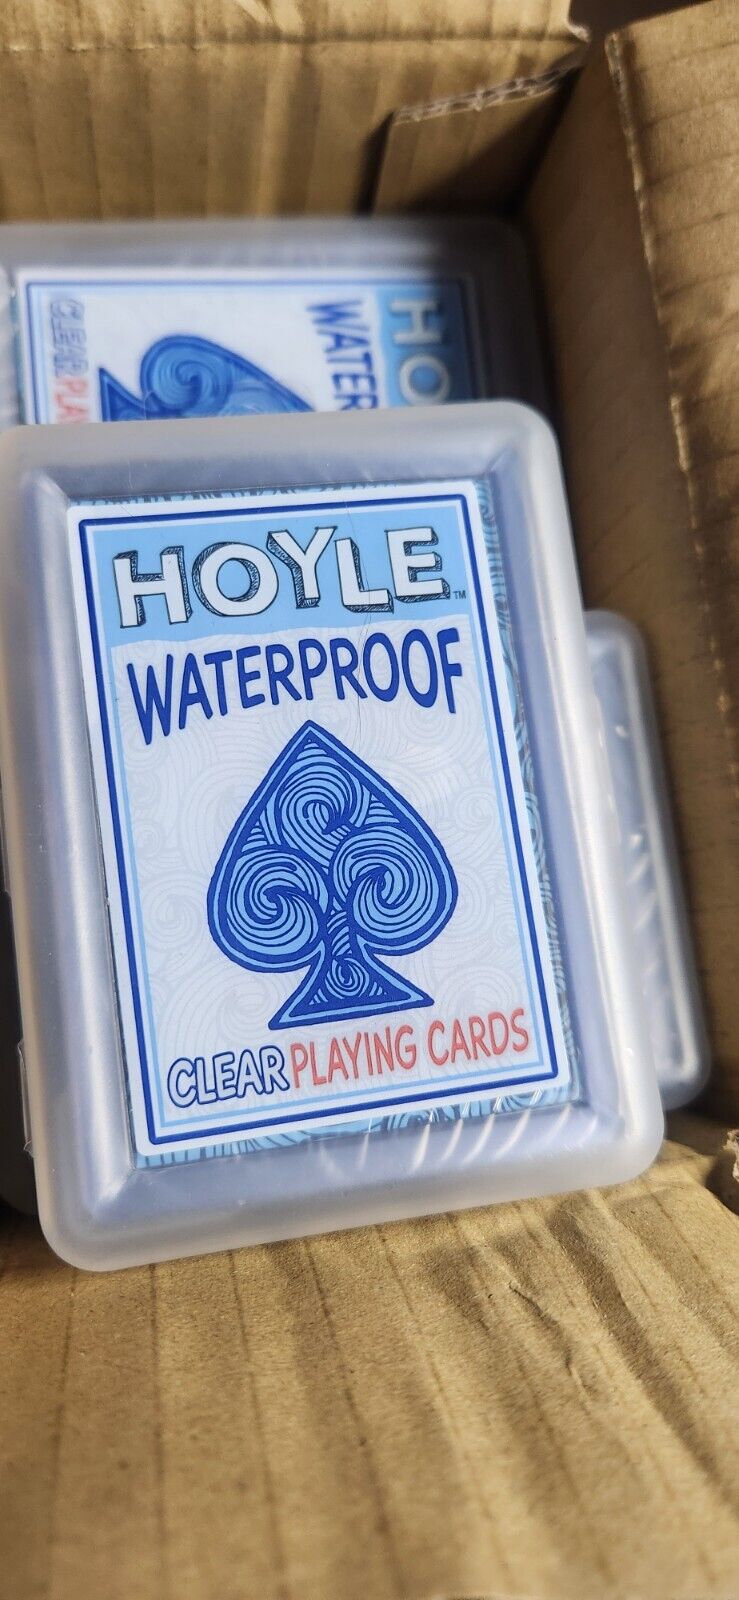 Hoyle Waterproof Clear Playing Cards New with Case - Flexible Washable